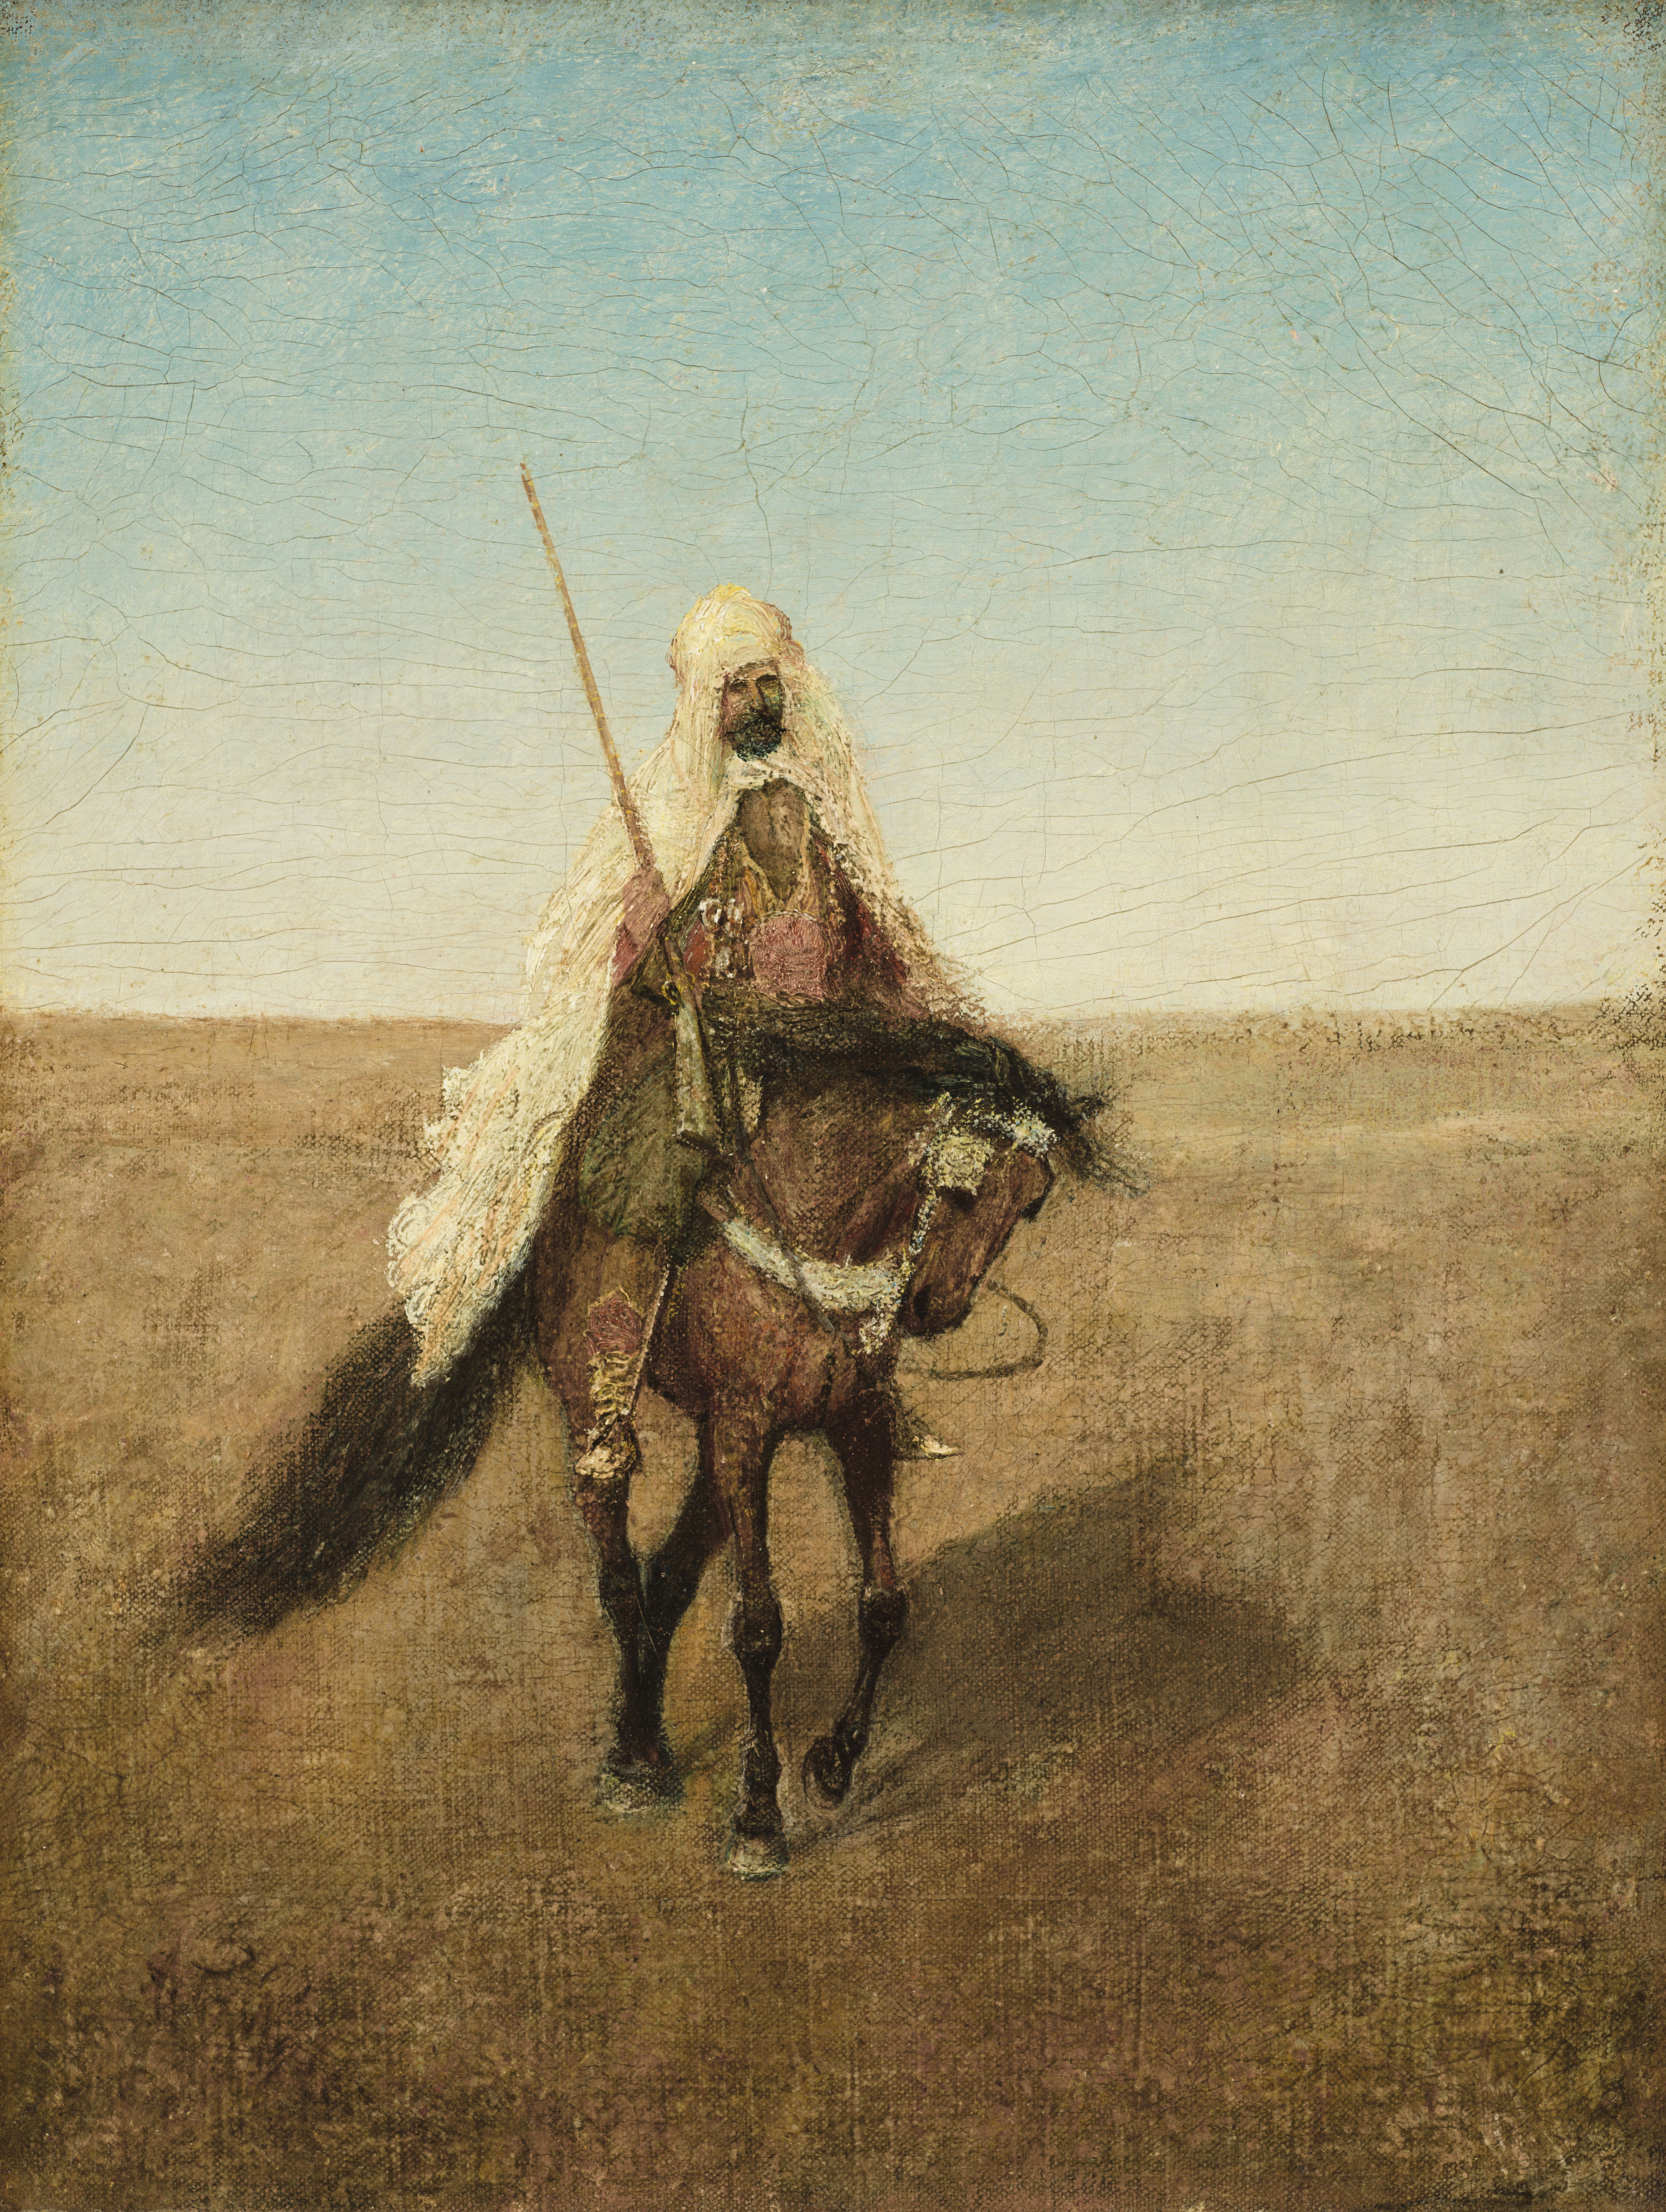 The Lone Scout by Albert Pinkham Ryder